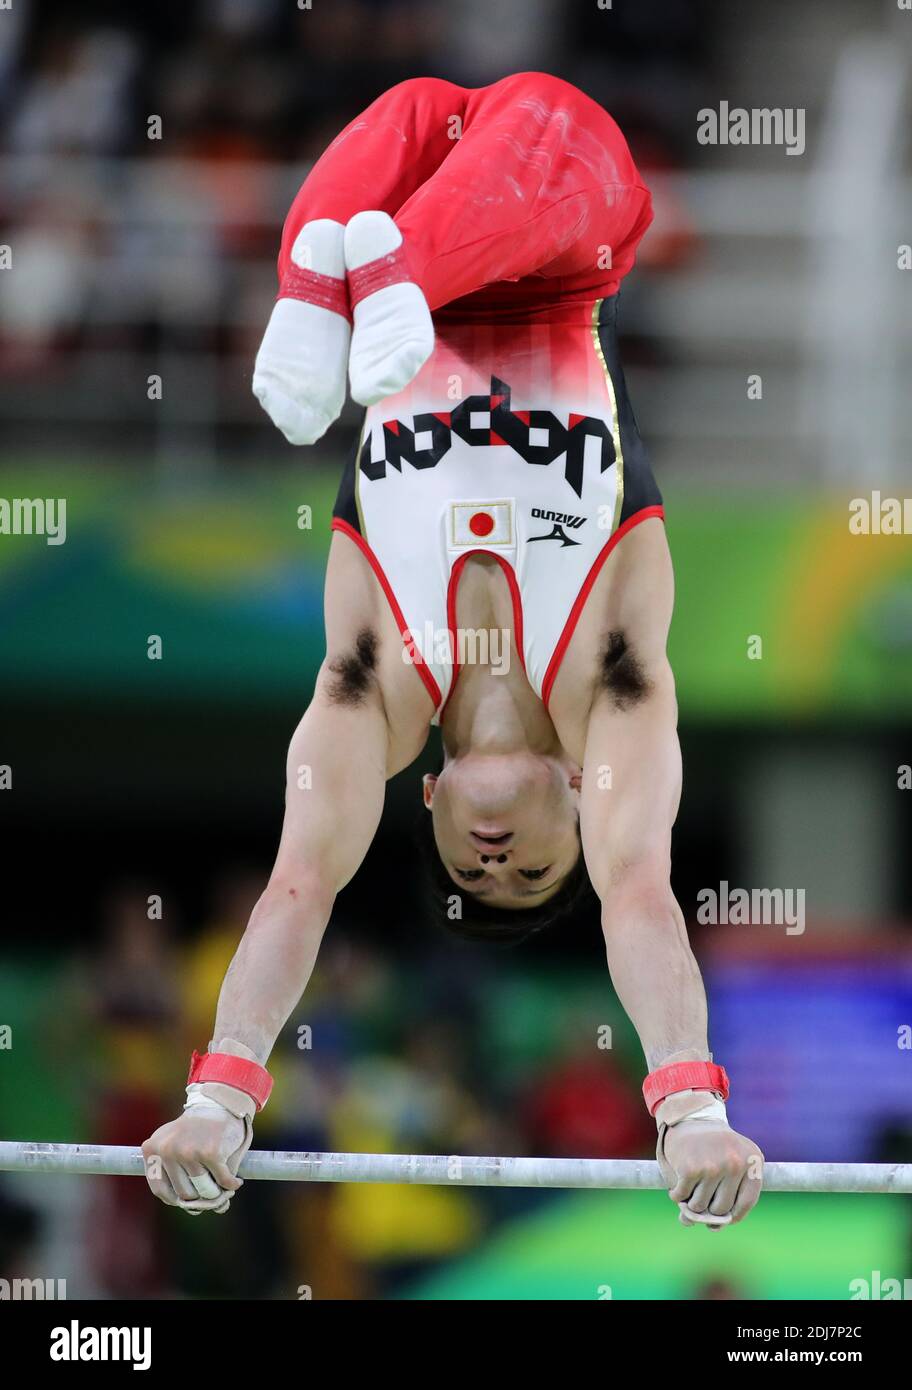 Japanese gymnast Kohei Uchimura performs his routine on The Parallel Bars in the Men's Artistic Gymnastics Individual All-Around Finals of the 2016 Rio Summer Olympics in Rio de Janeiro, Brazil, August 10, 2016. Uchimura won the Gold Medal, edging out Ukraine's Oleg Verniaiev, who won the Silver Medal and Great Britain's Max Whitlock won the Bronze. Photo by Giuliano Bevilacqua/ABACAPRESS.COM Stock Photo